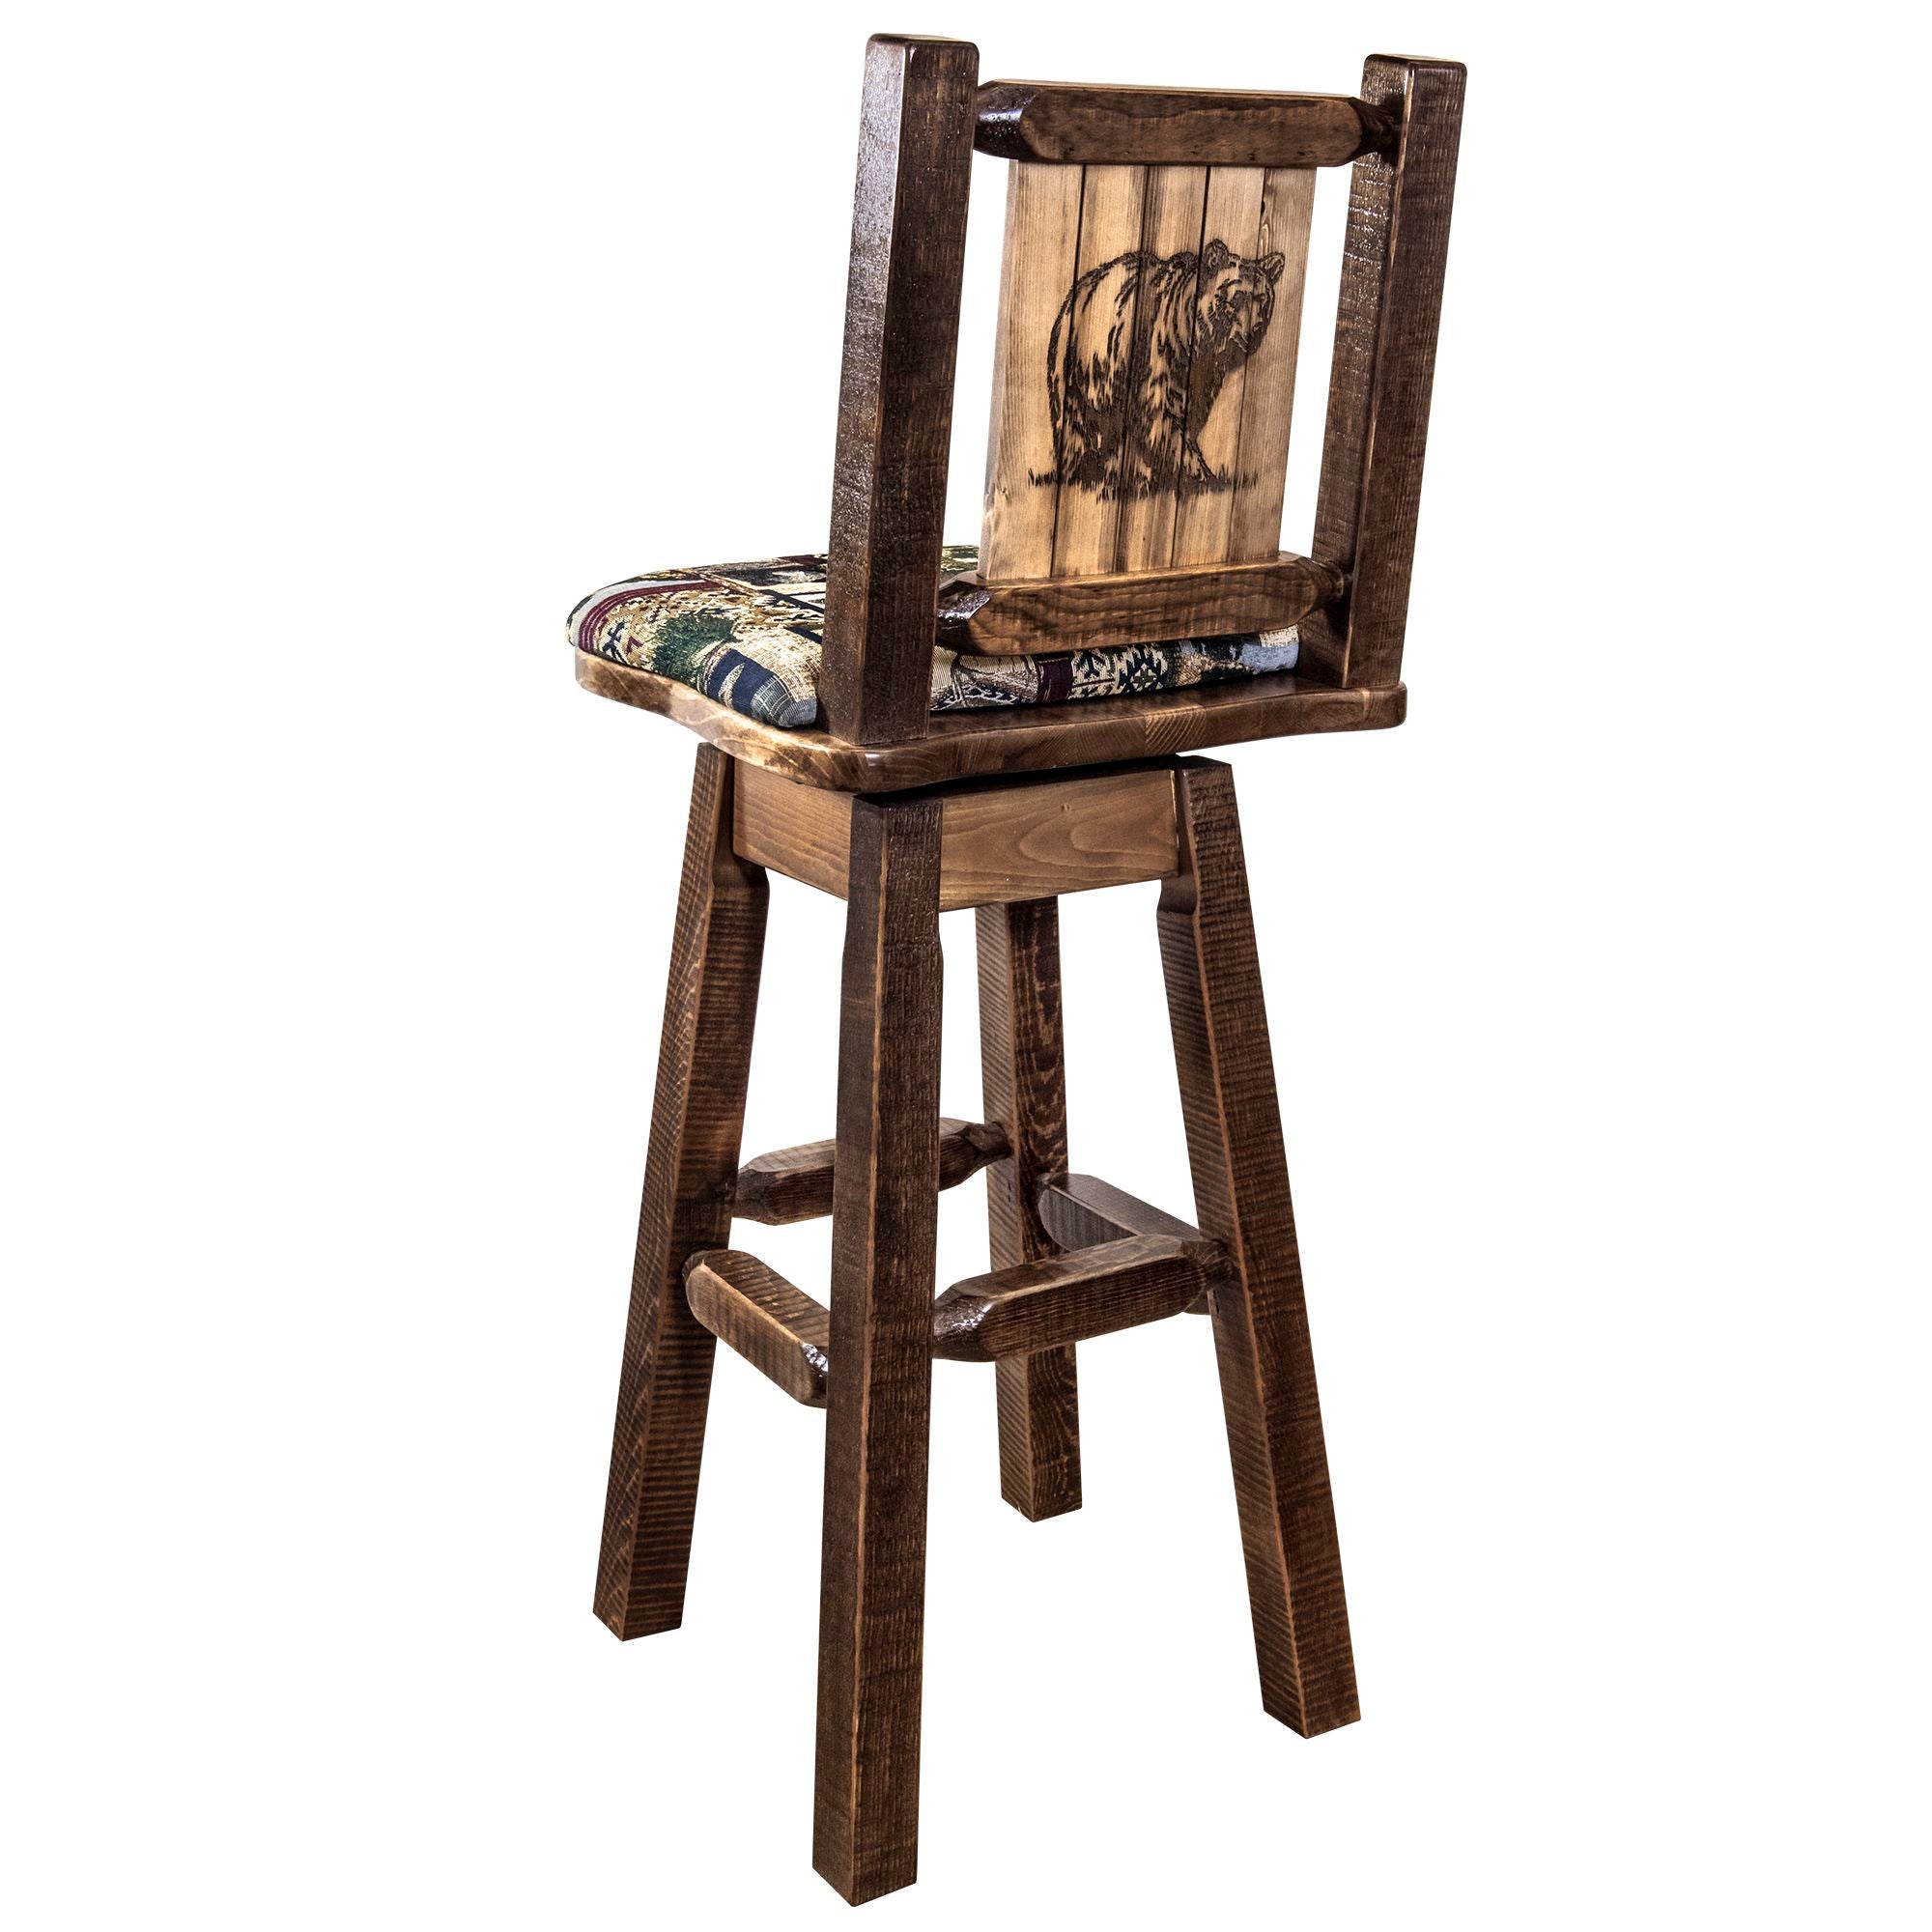 montana woodworks homestead collection barstool with back and swivel woodland pattern upholstery and laser engraved bear design mwhcbswsnrslbear